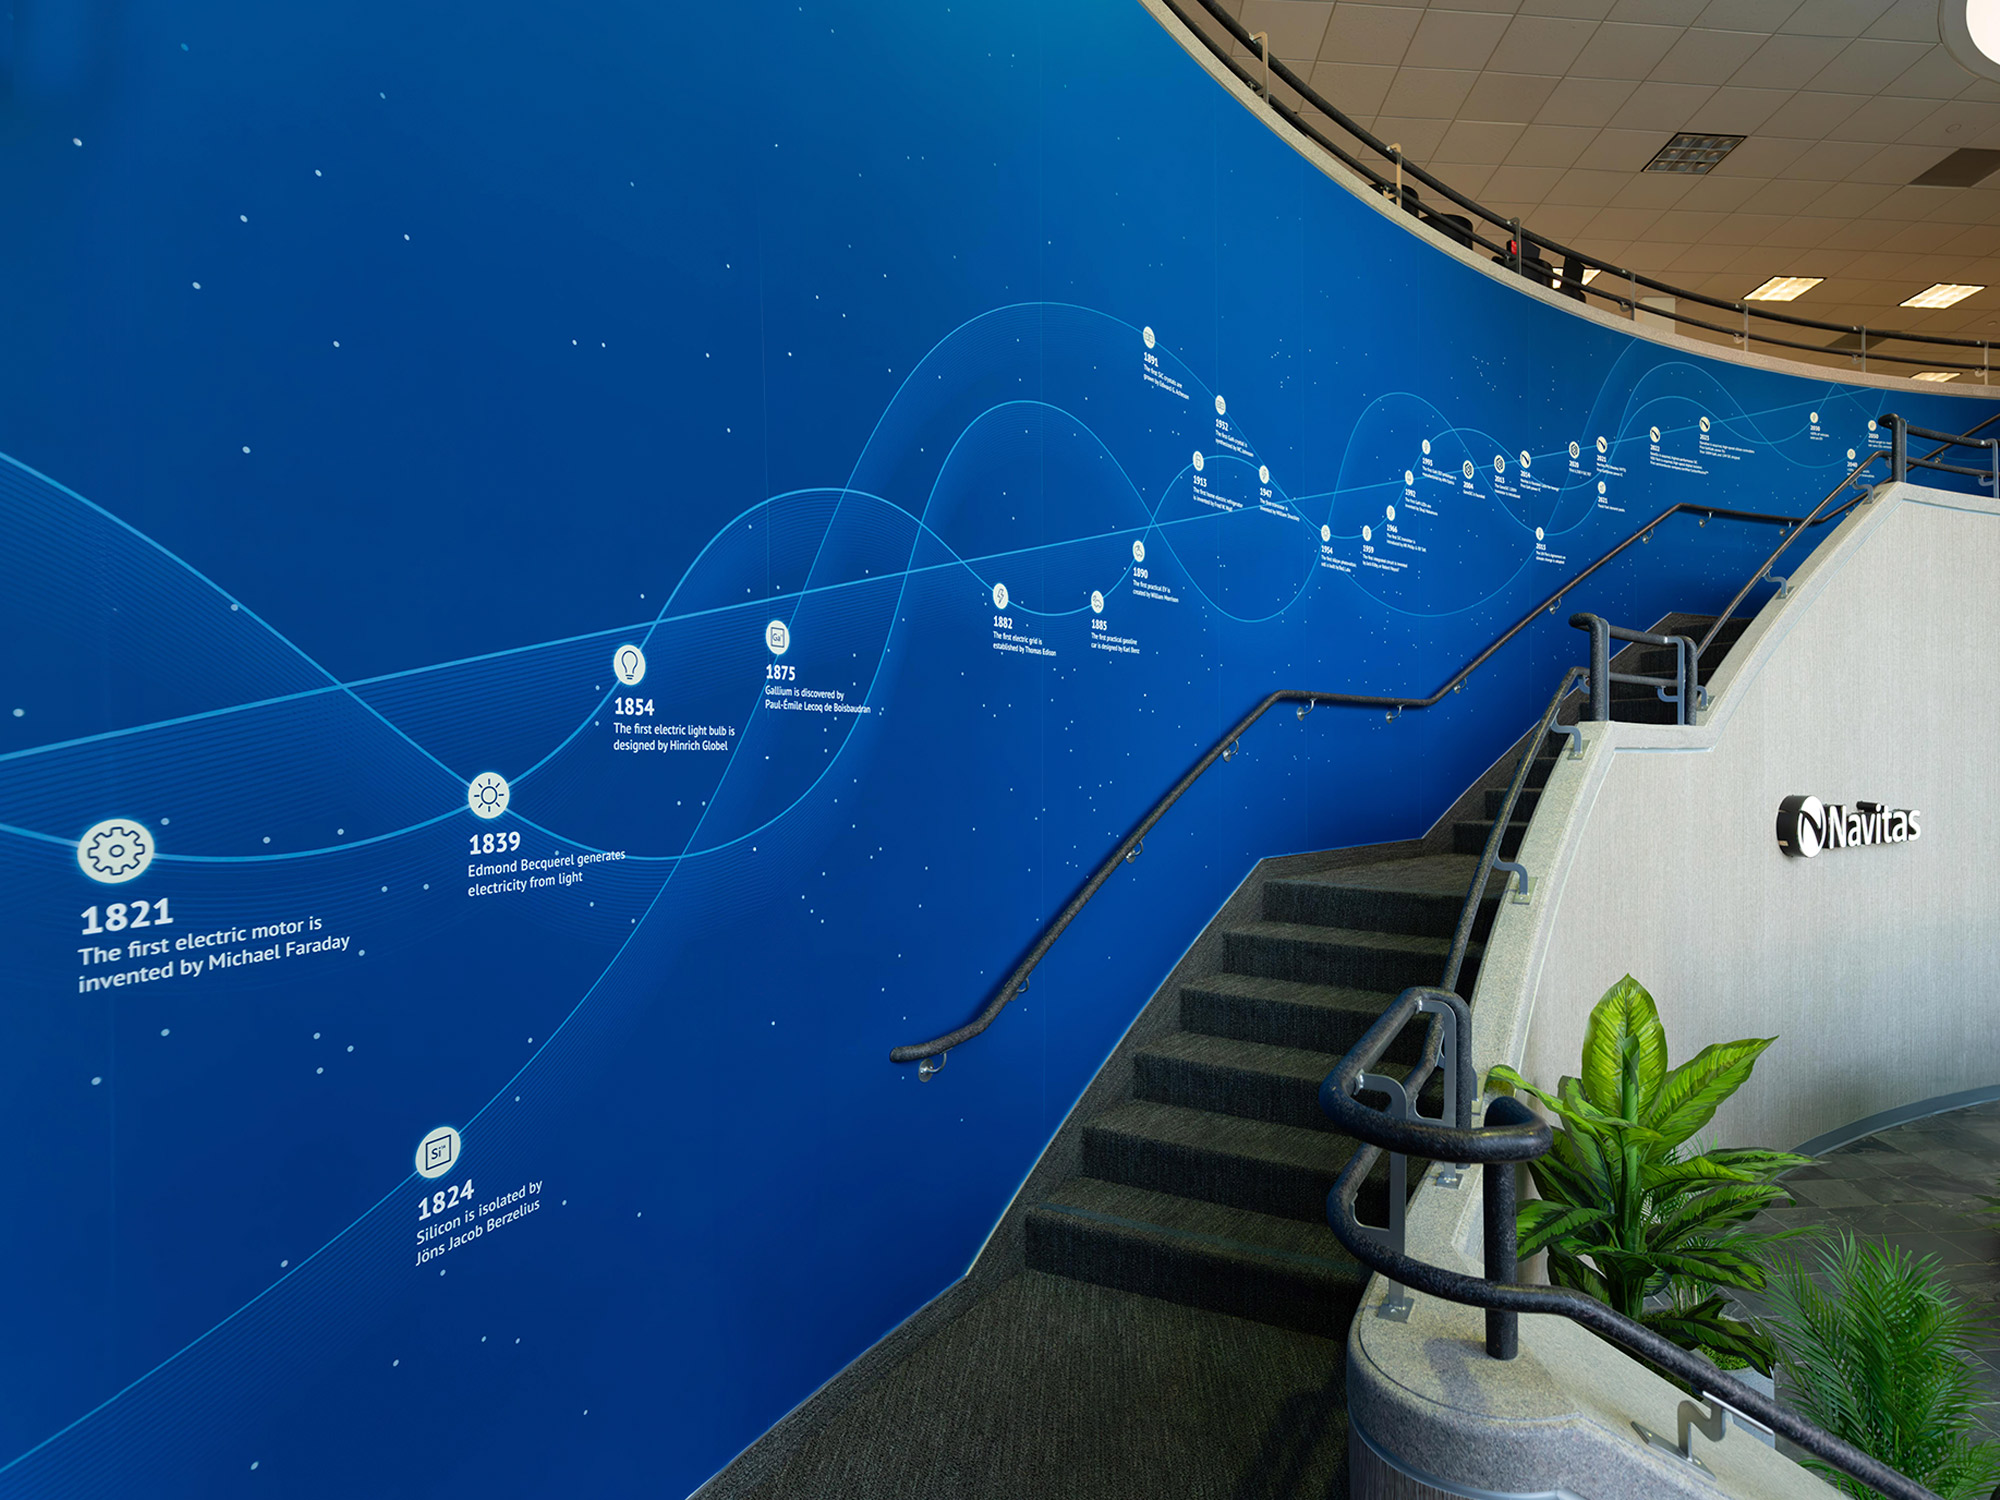 Vibrant blue wall tracing an ascending staircase with branded graphics of a history timeline